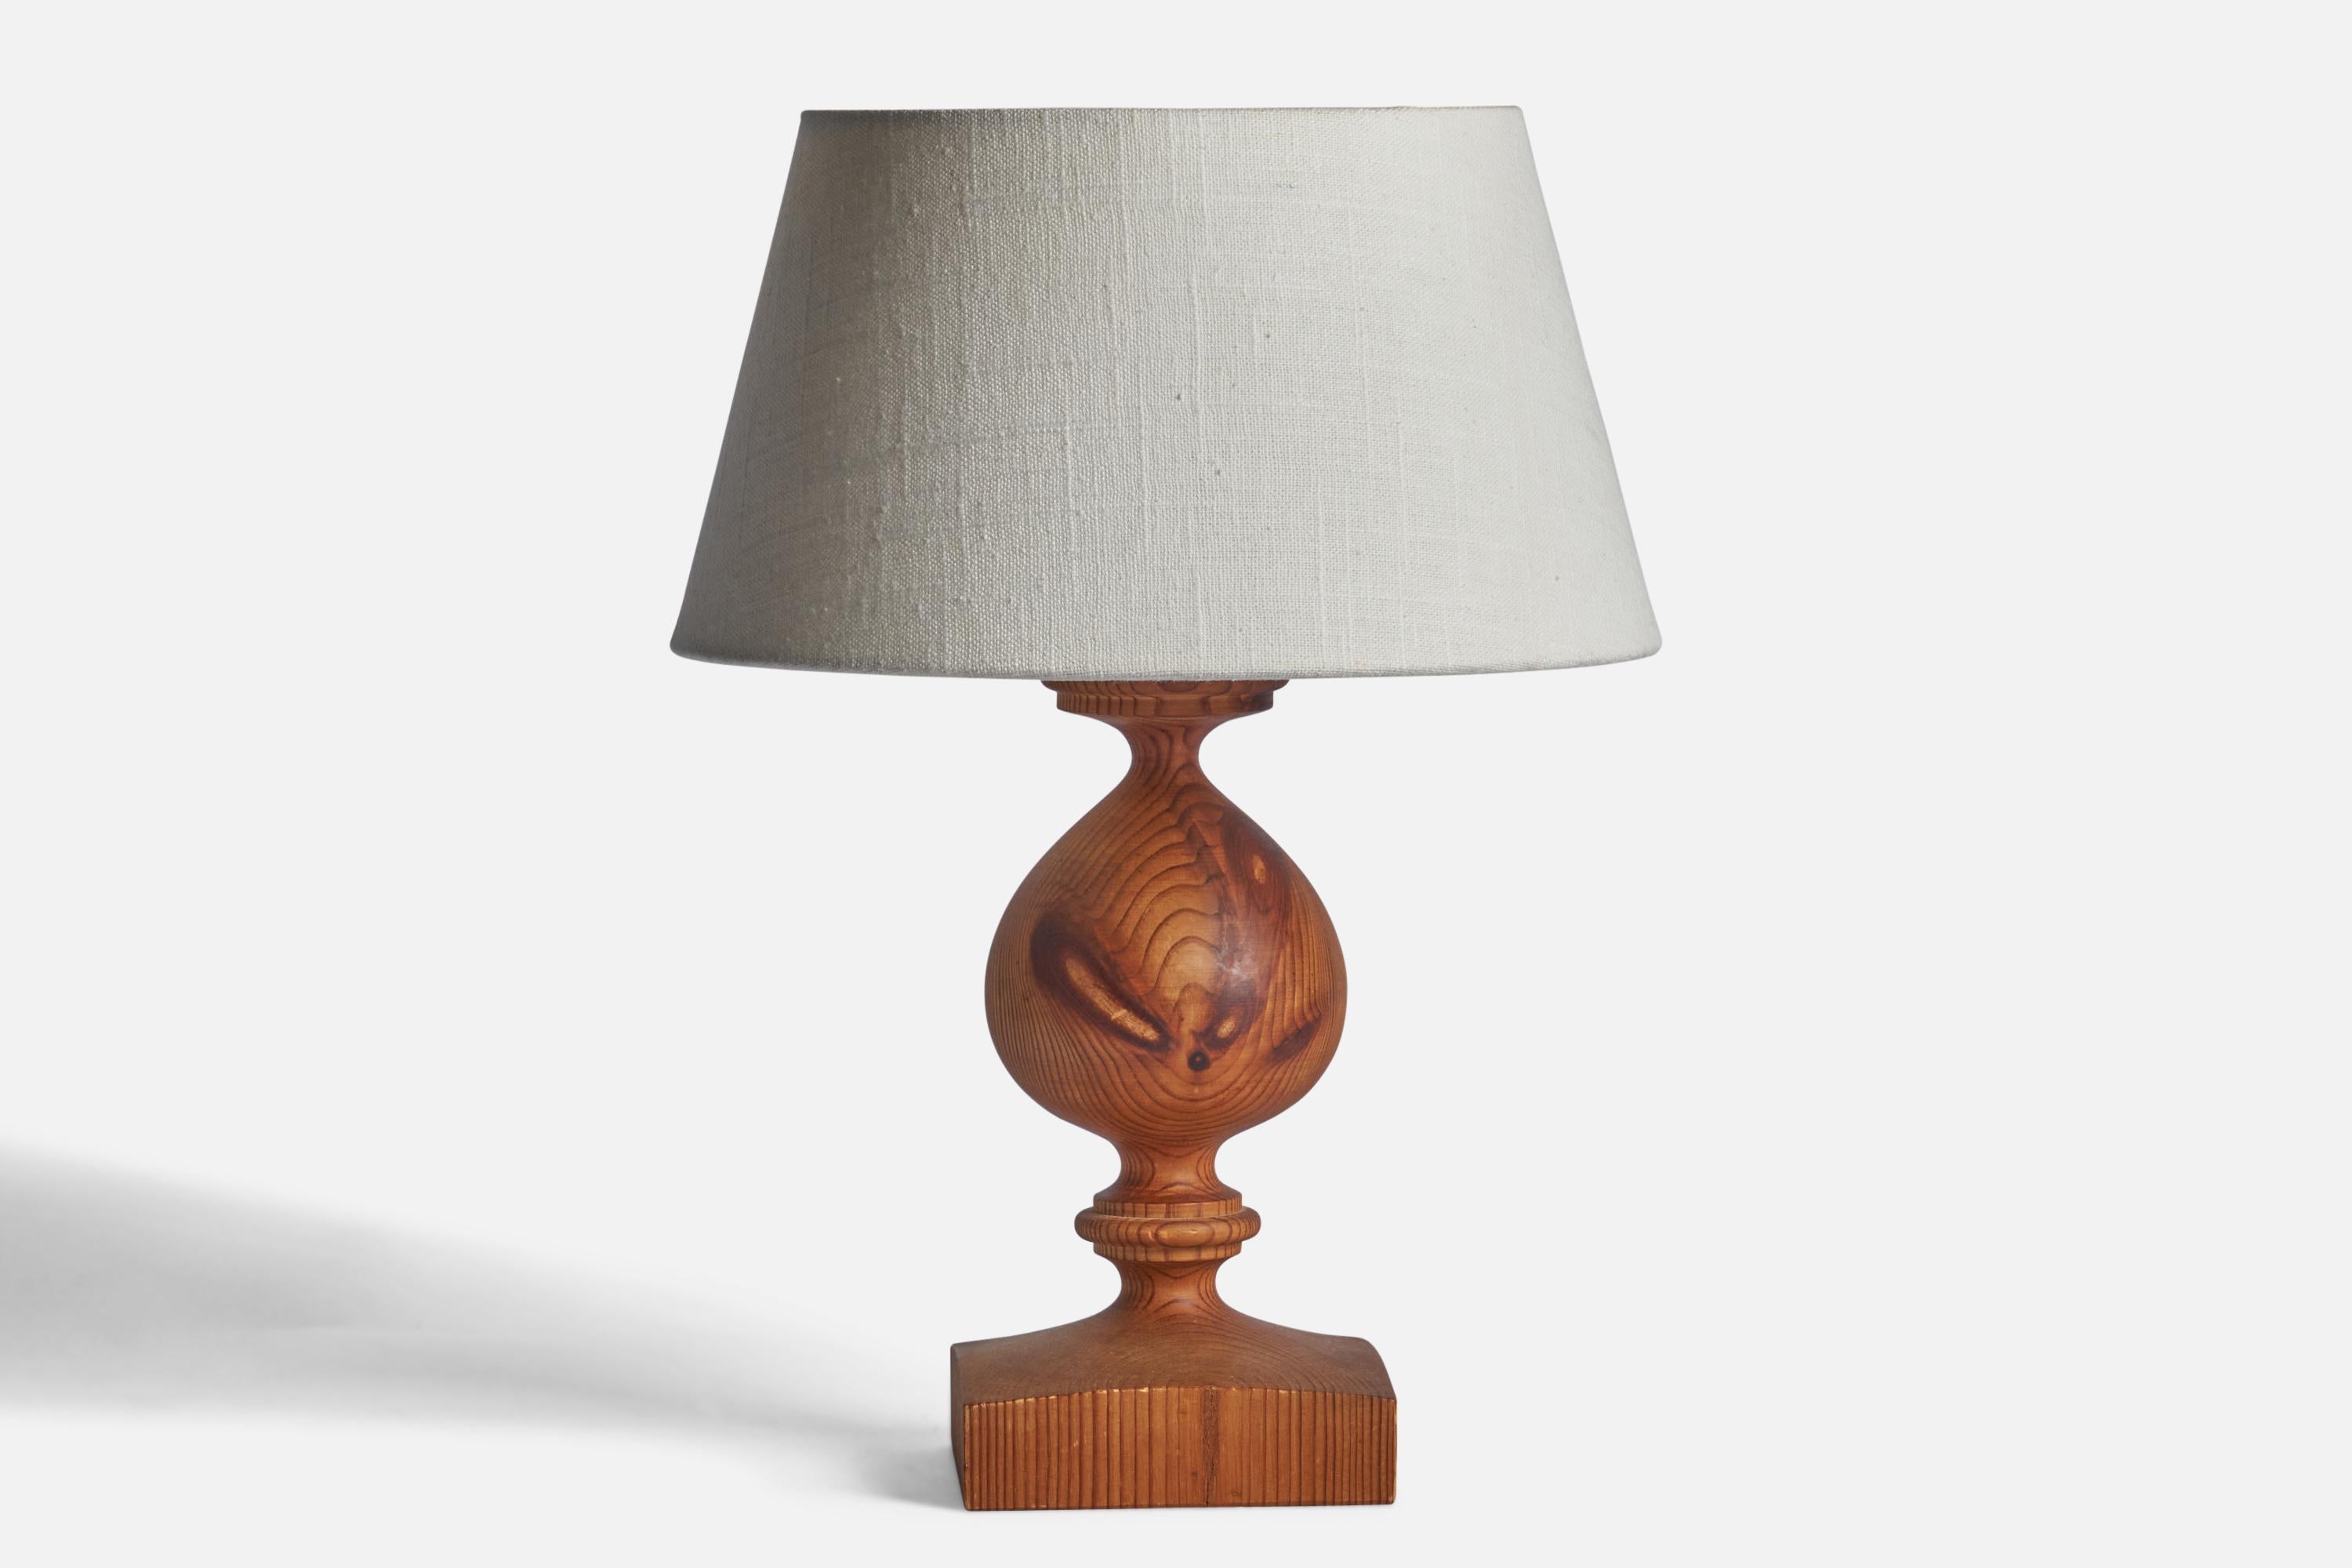 A table lamp designed and produced by Leif Christensson, Björnum, Sweden, 1970s.

Dimensions of Lamp (inches): 10.25” H x 4.25” W x 4.25” D
Dimensions of Shade (inches): 7” Top Diameter x 10” Bottom Diameter x 5.5” H 
Dimensions of Lamp with Shade